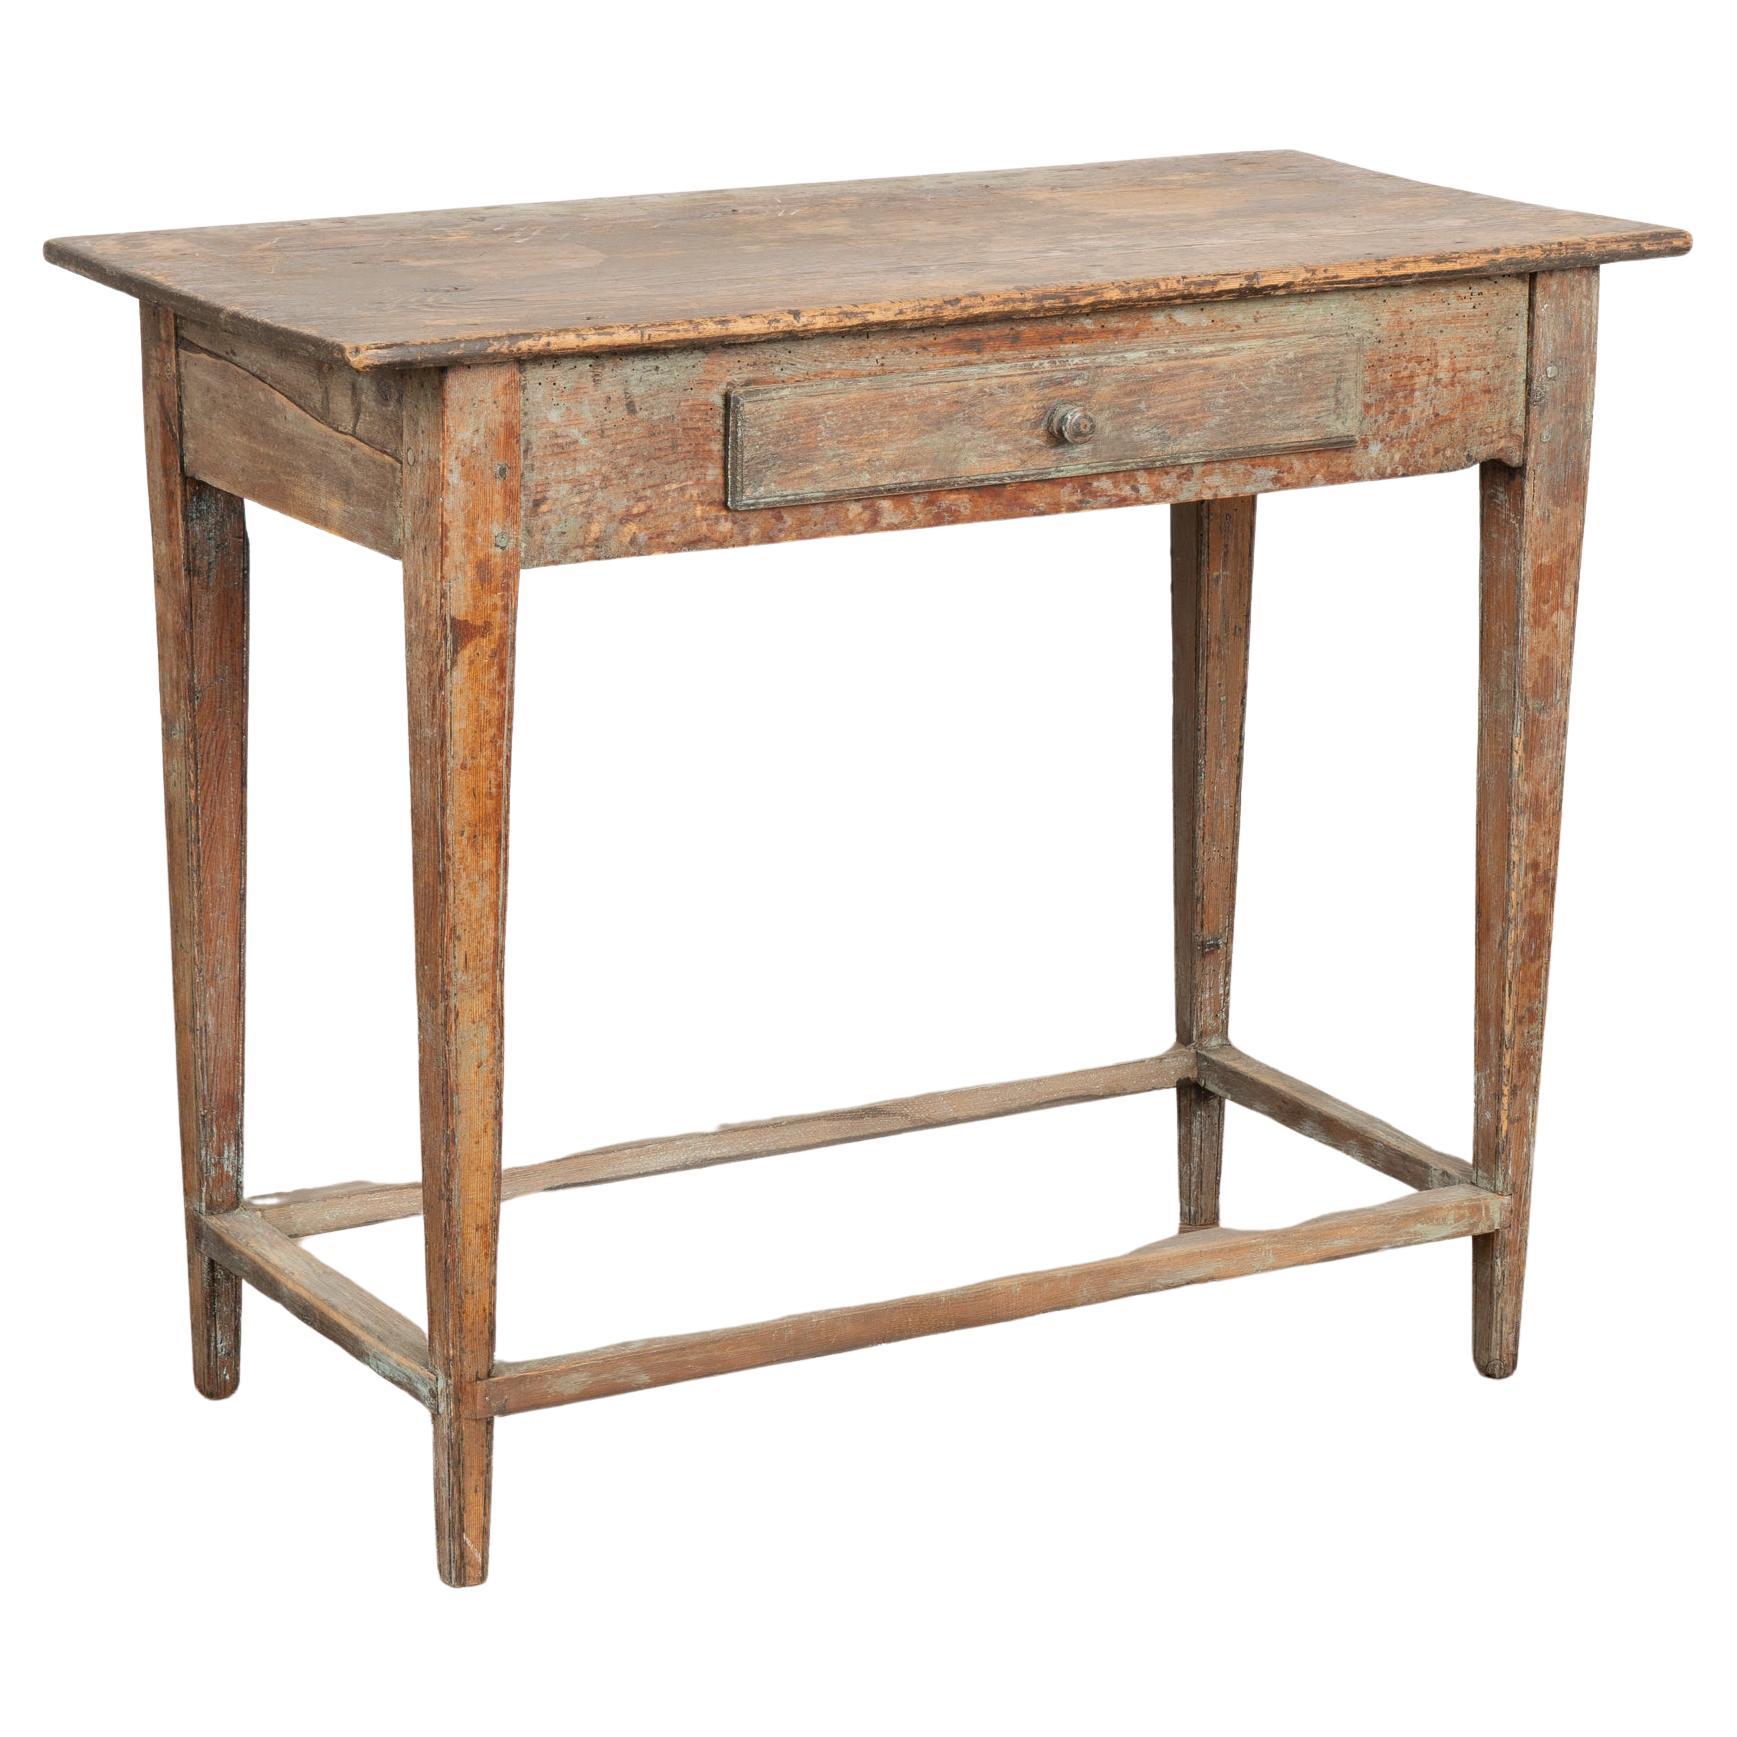 Original Painted Pine Side Table With Drawer, Sweden circa 1820-40